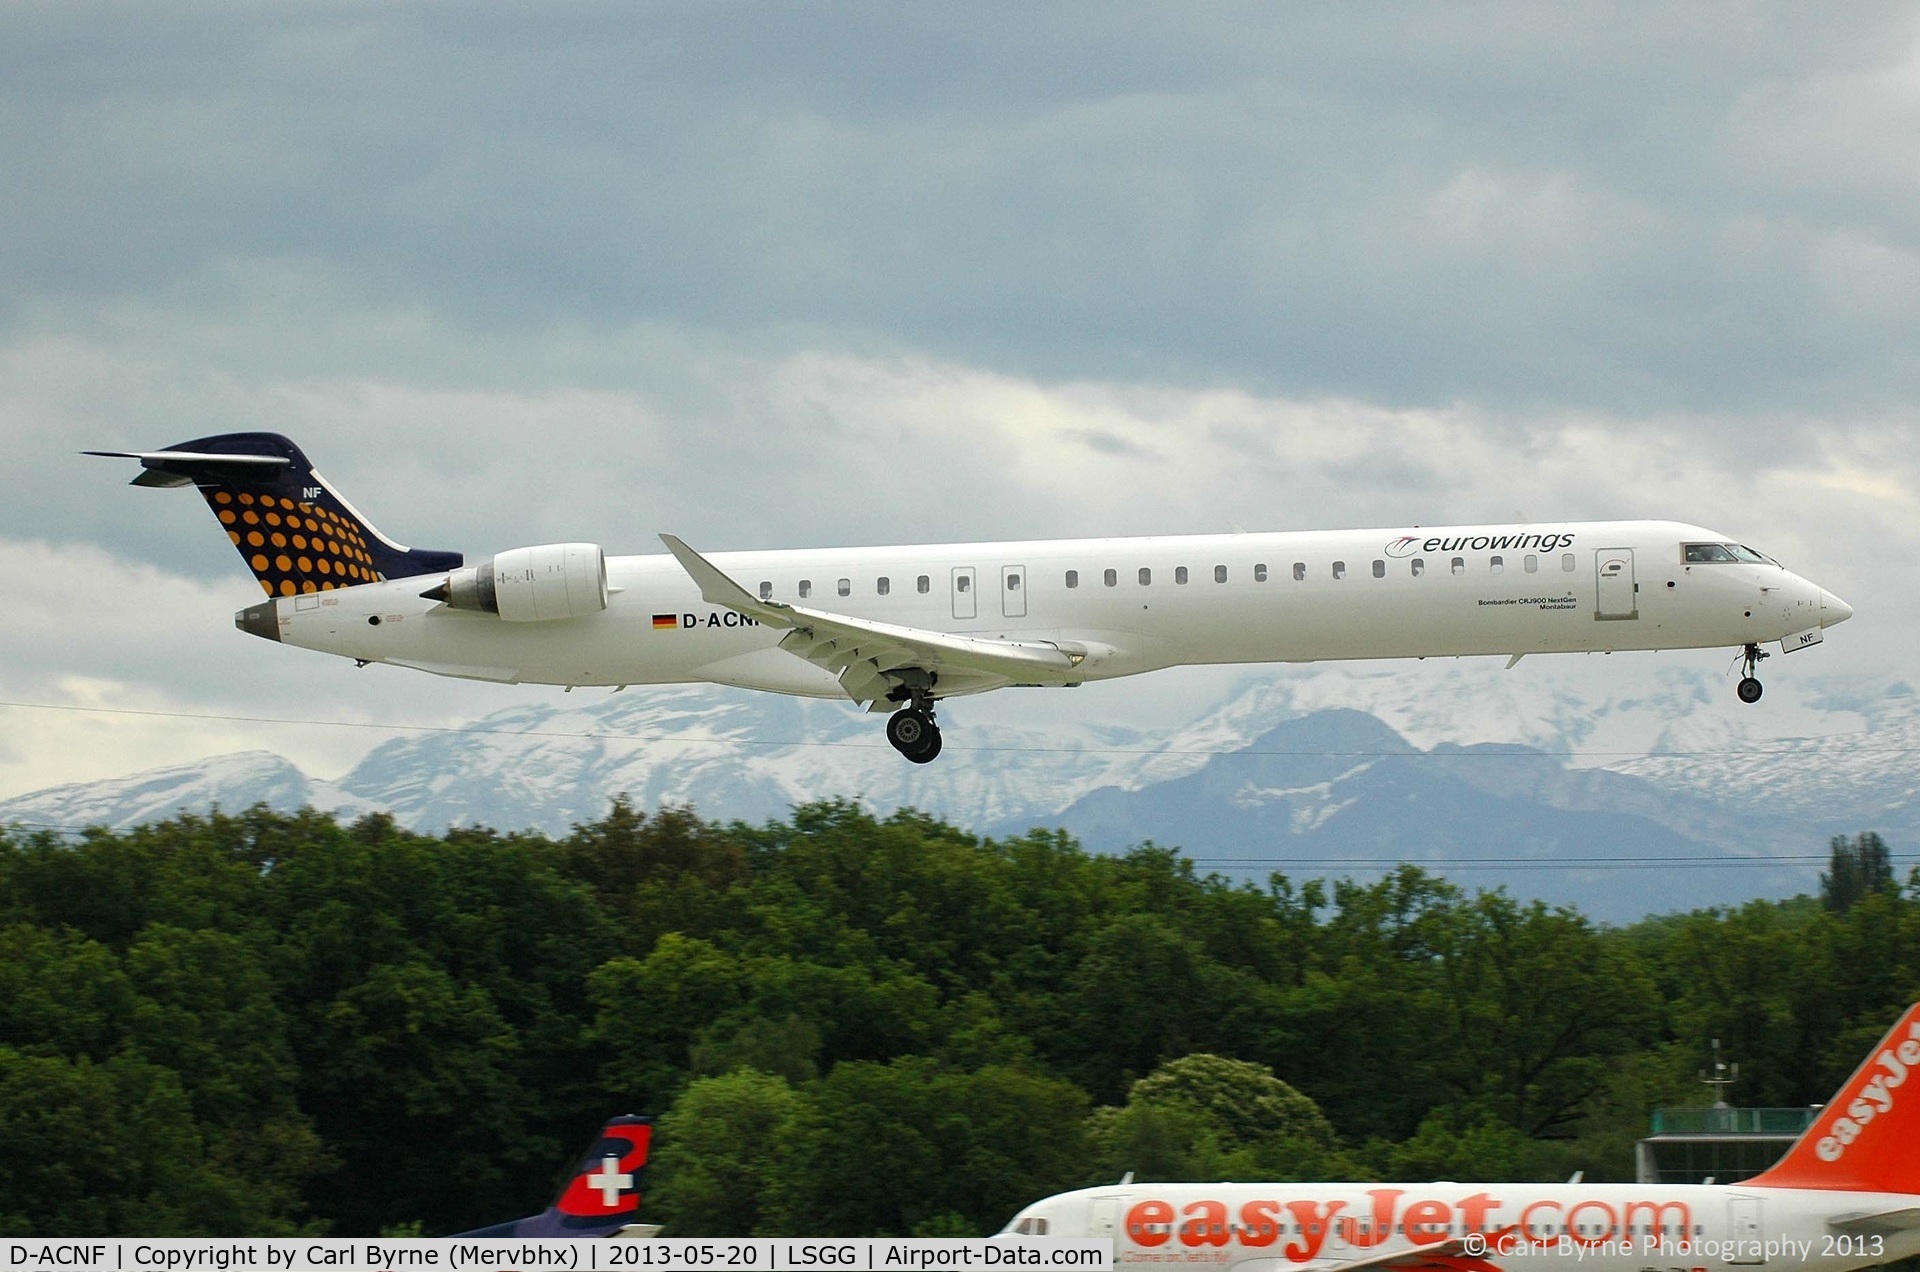 D-ACNF, 2009 Bombardier CRJ-900 (CL-600-2D24) C/N 15243, Taken from the park at the 05 threshold.